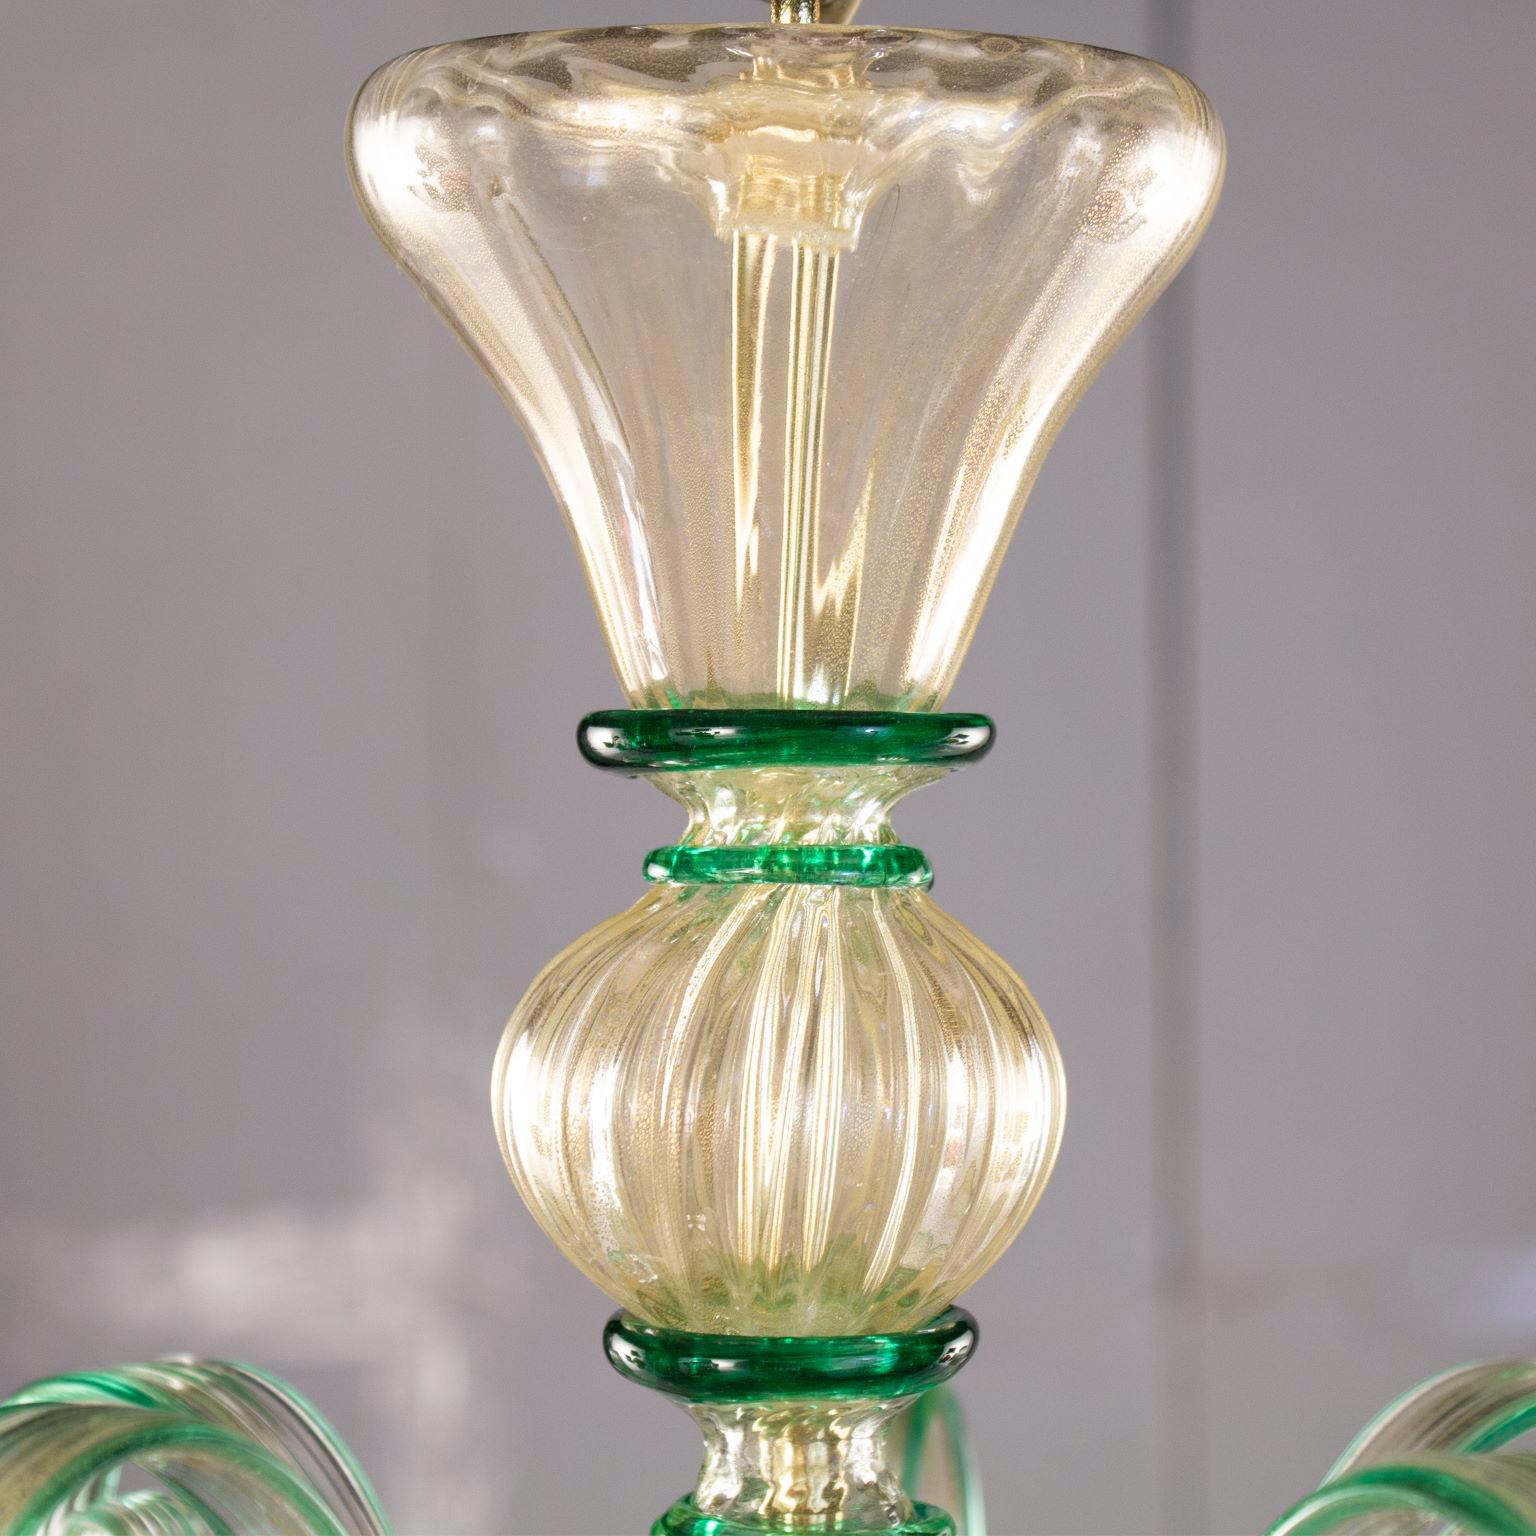 Chandelier 5 Arms Golden Leaf-green Artistic Murano Glass by Multiforme In New Condition For Sale In Trebaseleghe, IT